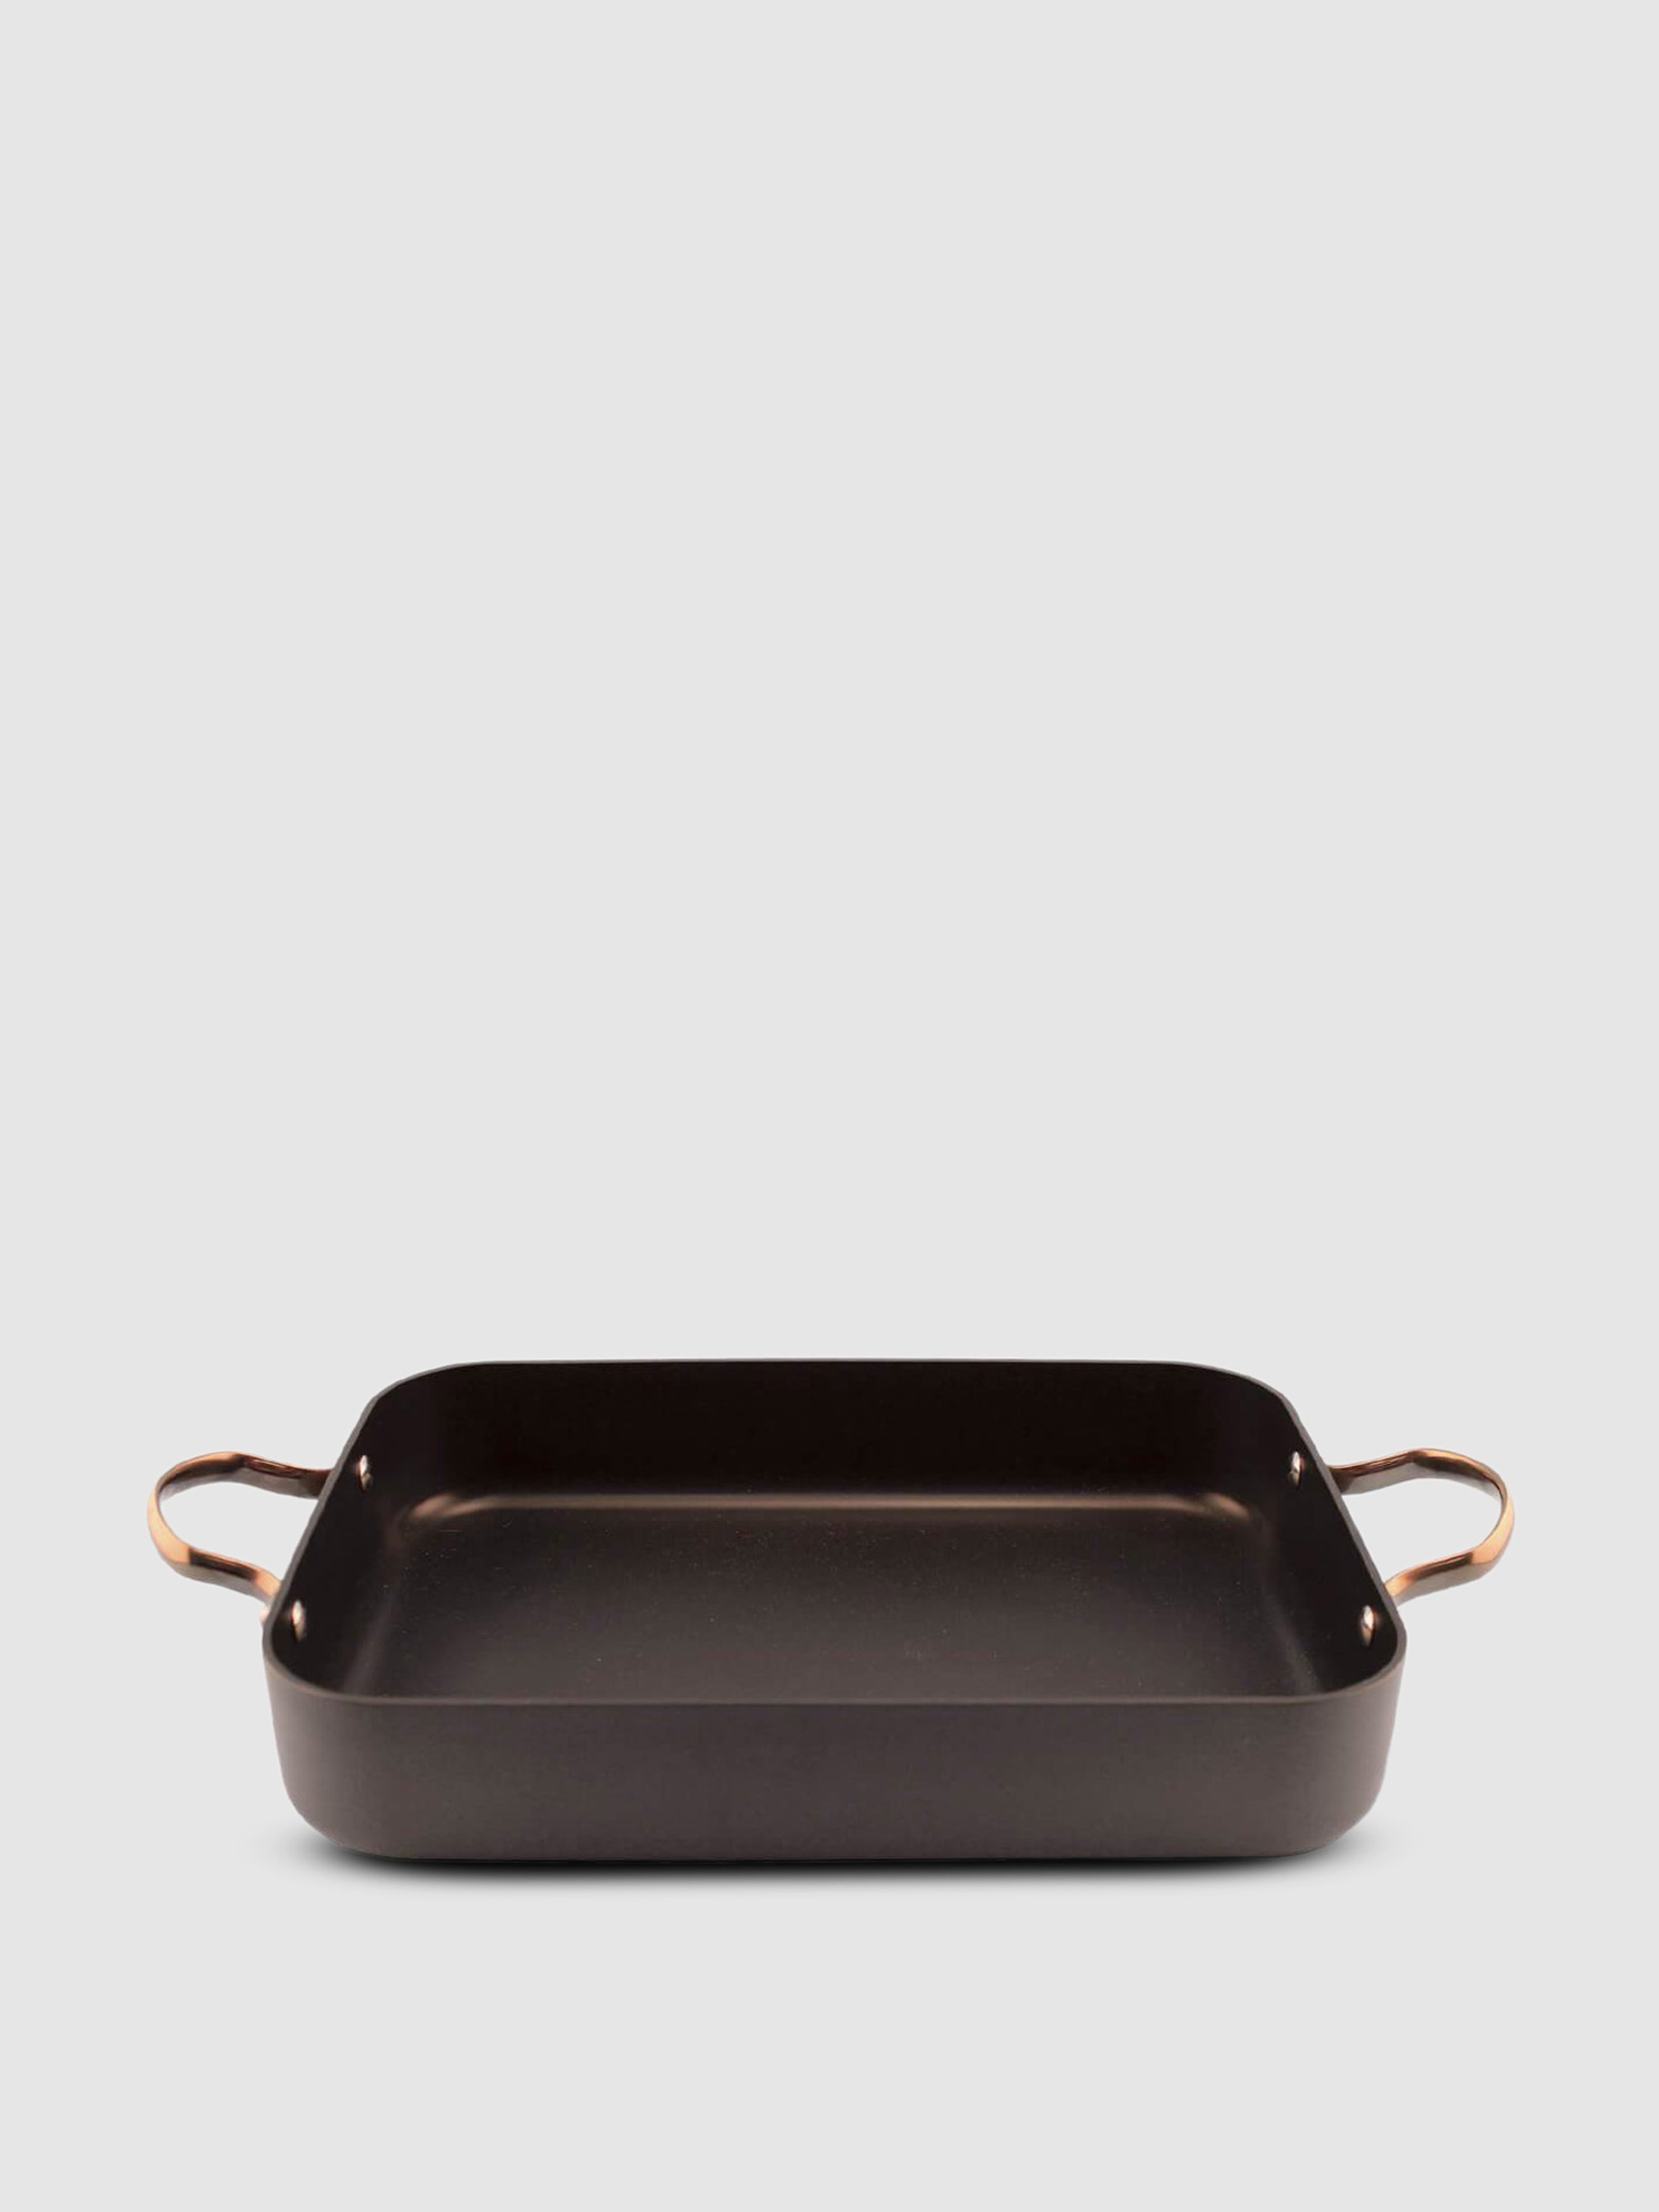 Berghoff Ouro Black Hard Anodized Nonstick Single Roaster Pan With Rose Gold Handles